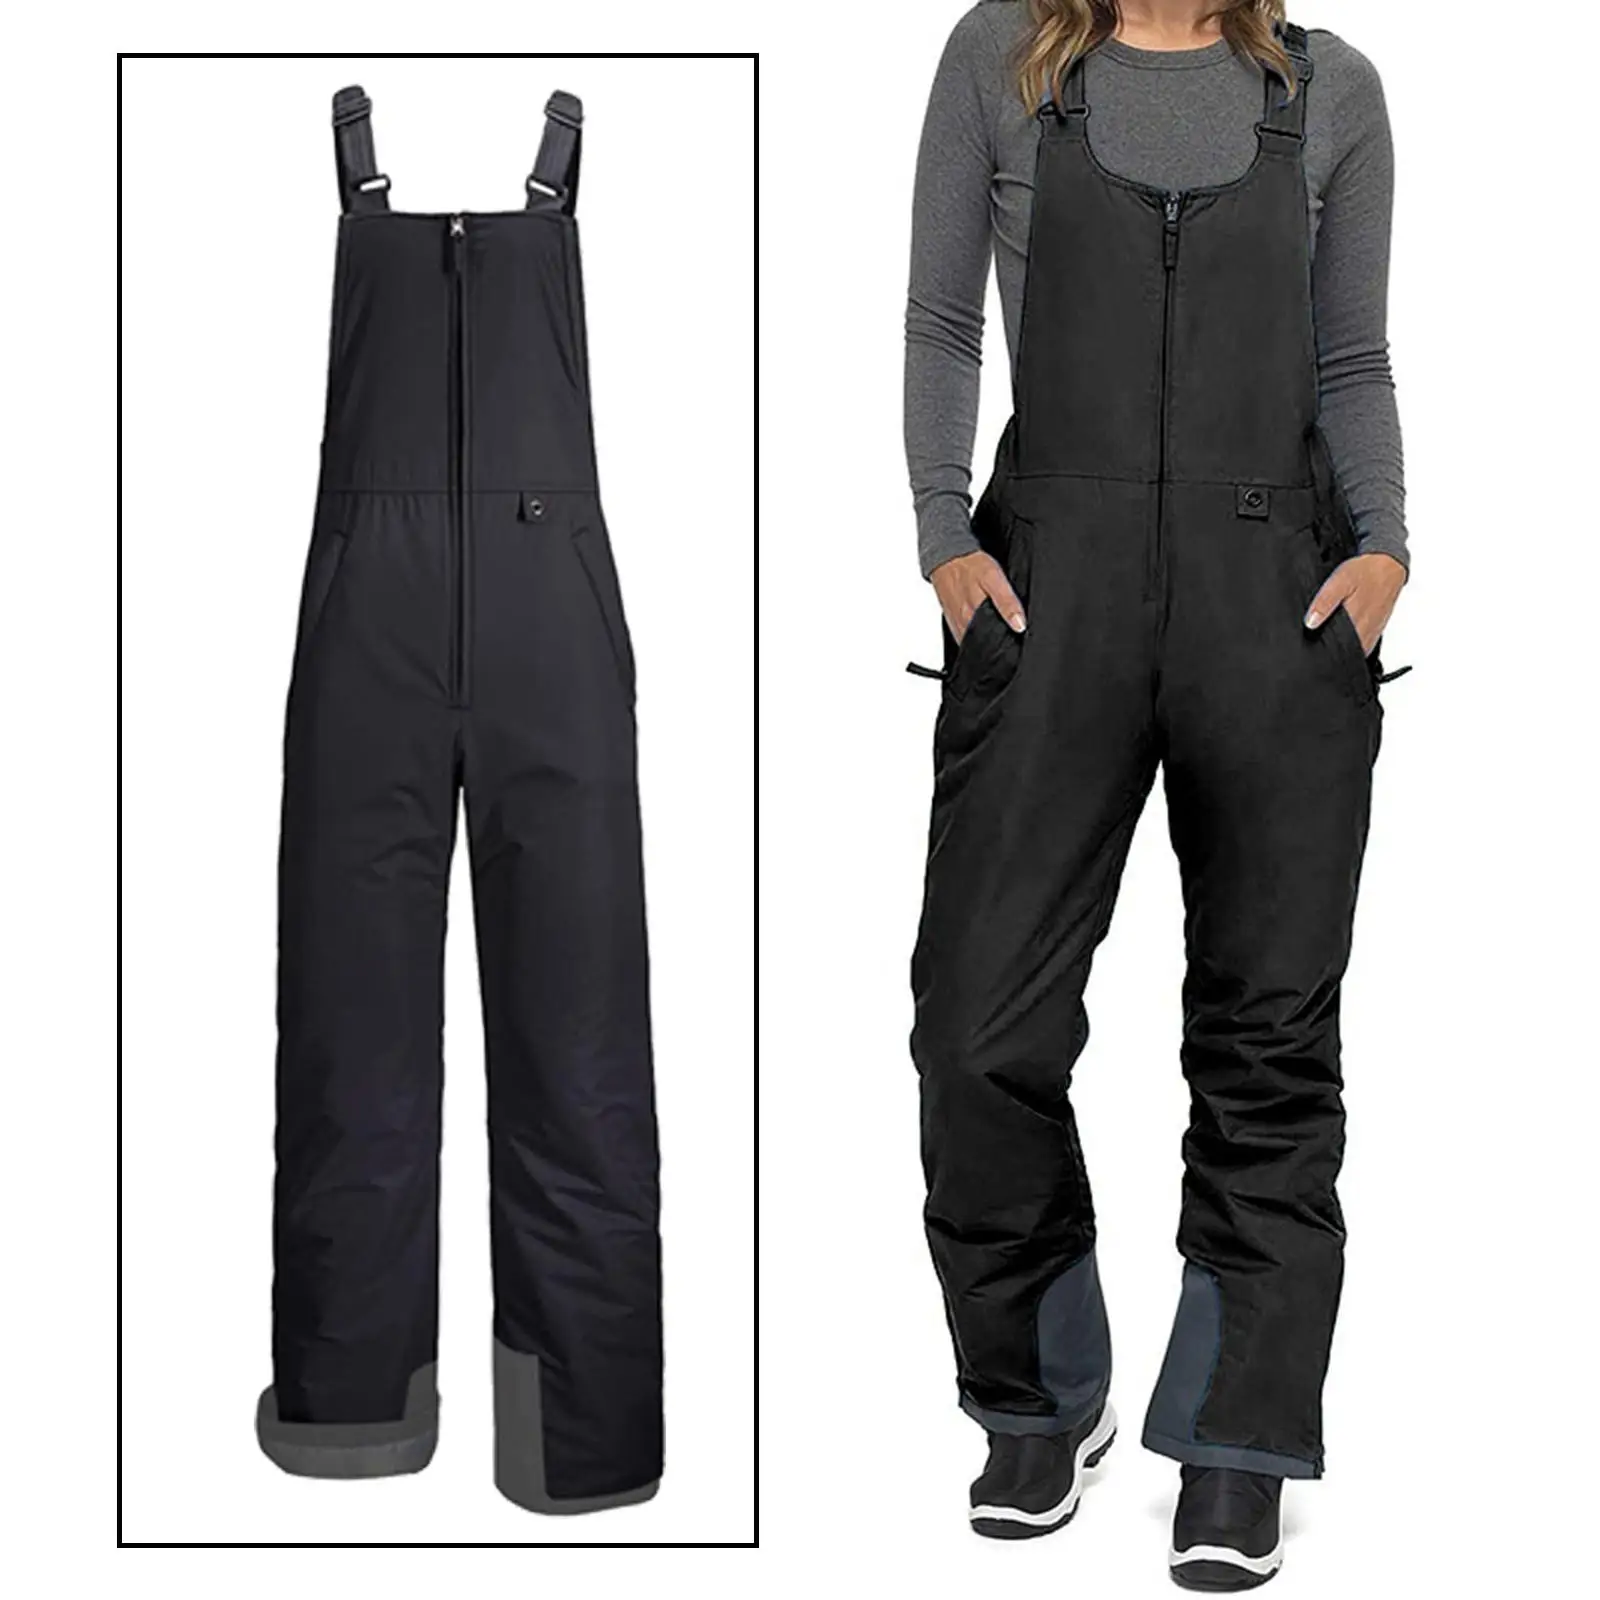 Ski Pants Water Resistant Warm Trousers Winter Windproof  Full-Length Insulated Snow Bibs Sled Skiing Pants Overalls for Women